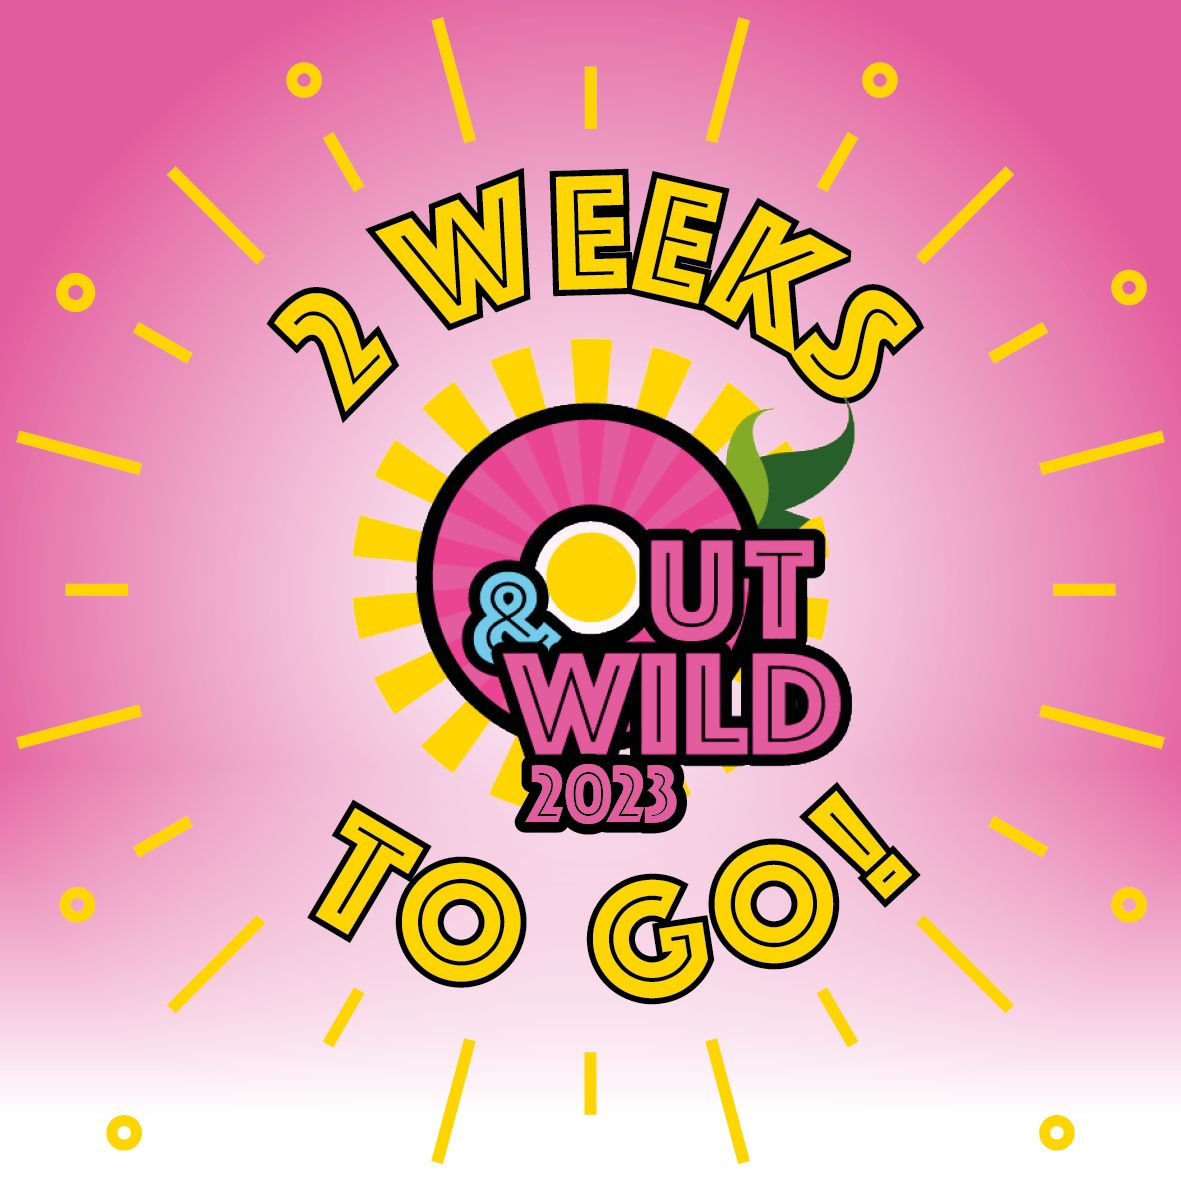 Just two weeks to go until Out & Wild festival! 🎉 It's time to start getting excited for the festival that brings us all closer together 🌈 We can't wait to see you all there, let's make some memories that will last a lifetime! 💕  #OutAndWildFestival #TwoWeeksToGo